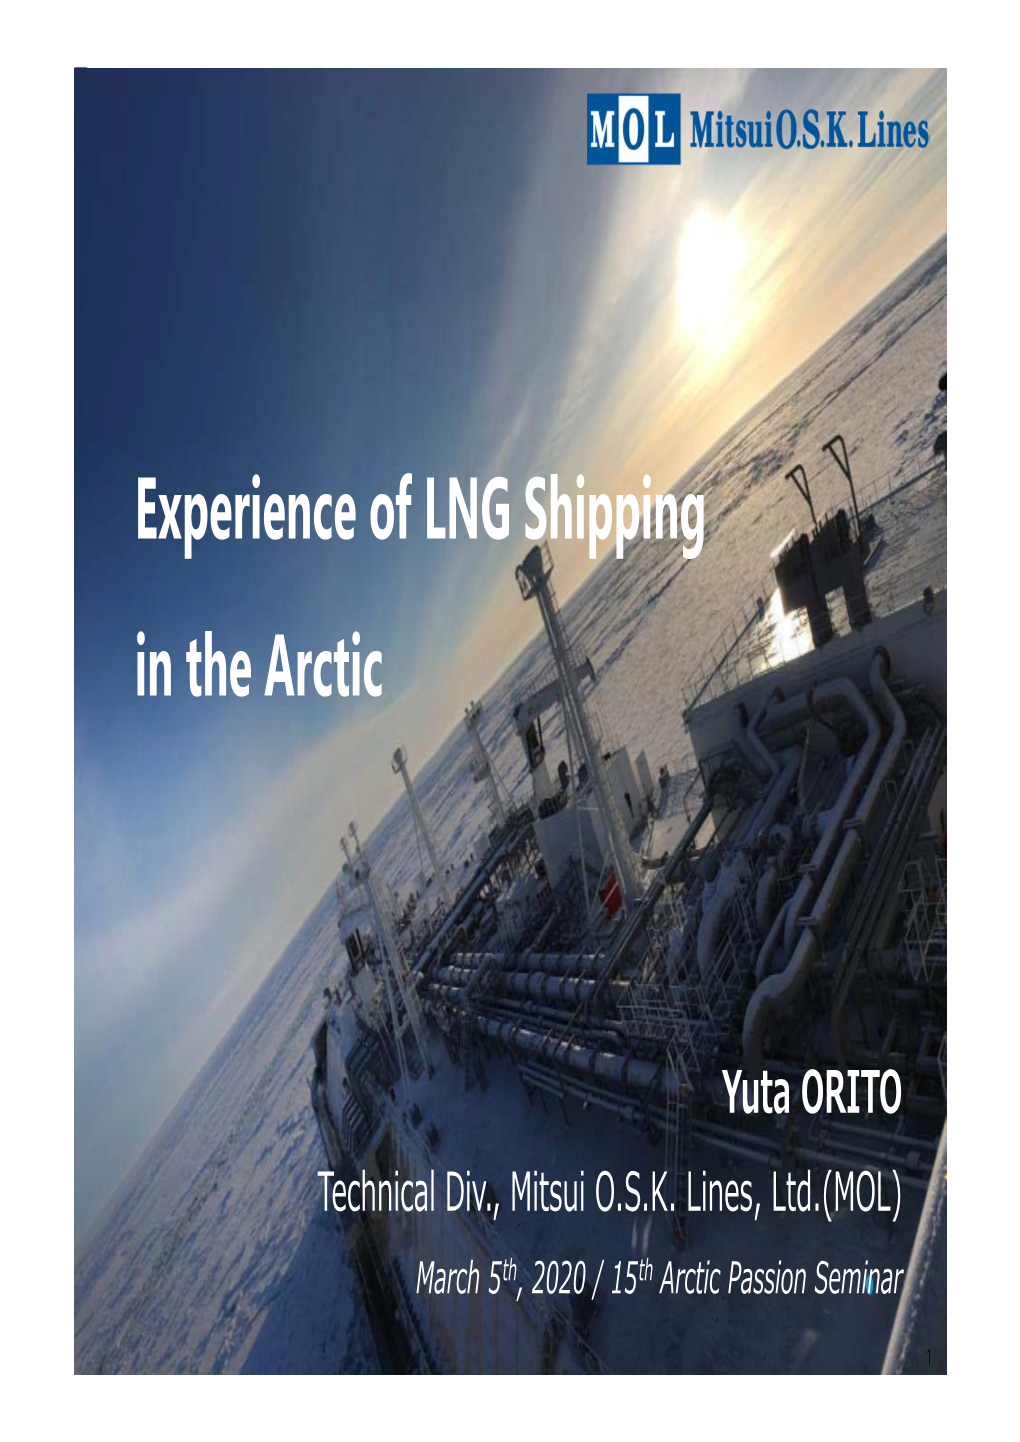 Experience of LNG Shipping in the Arctic